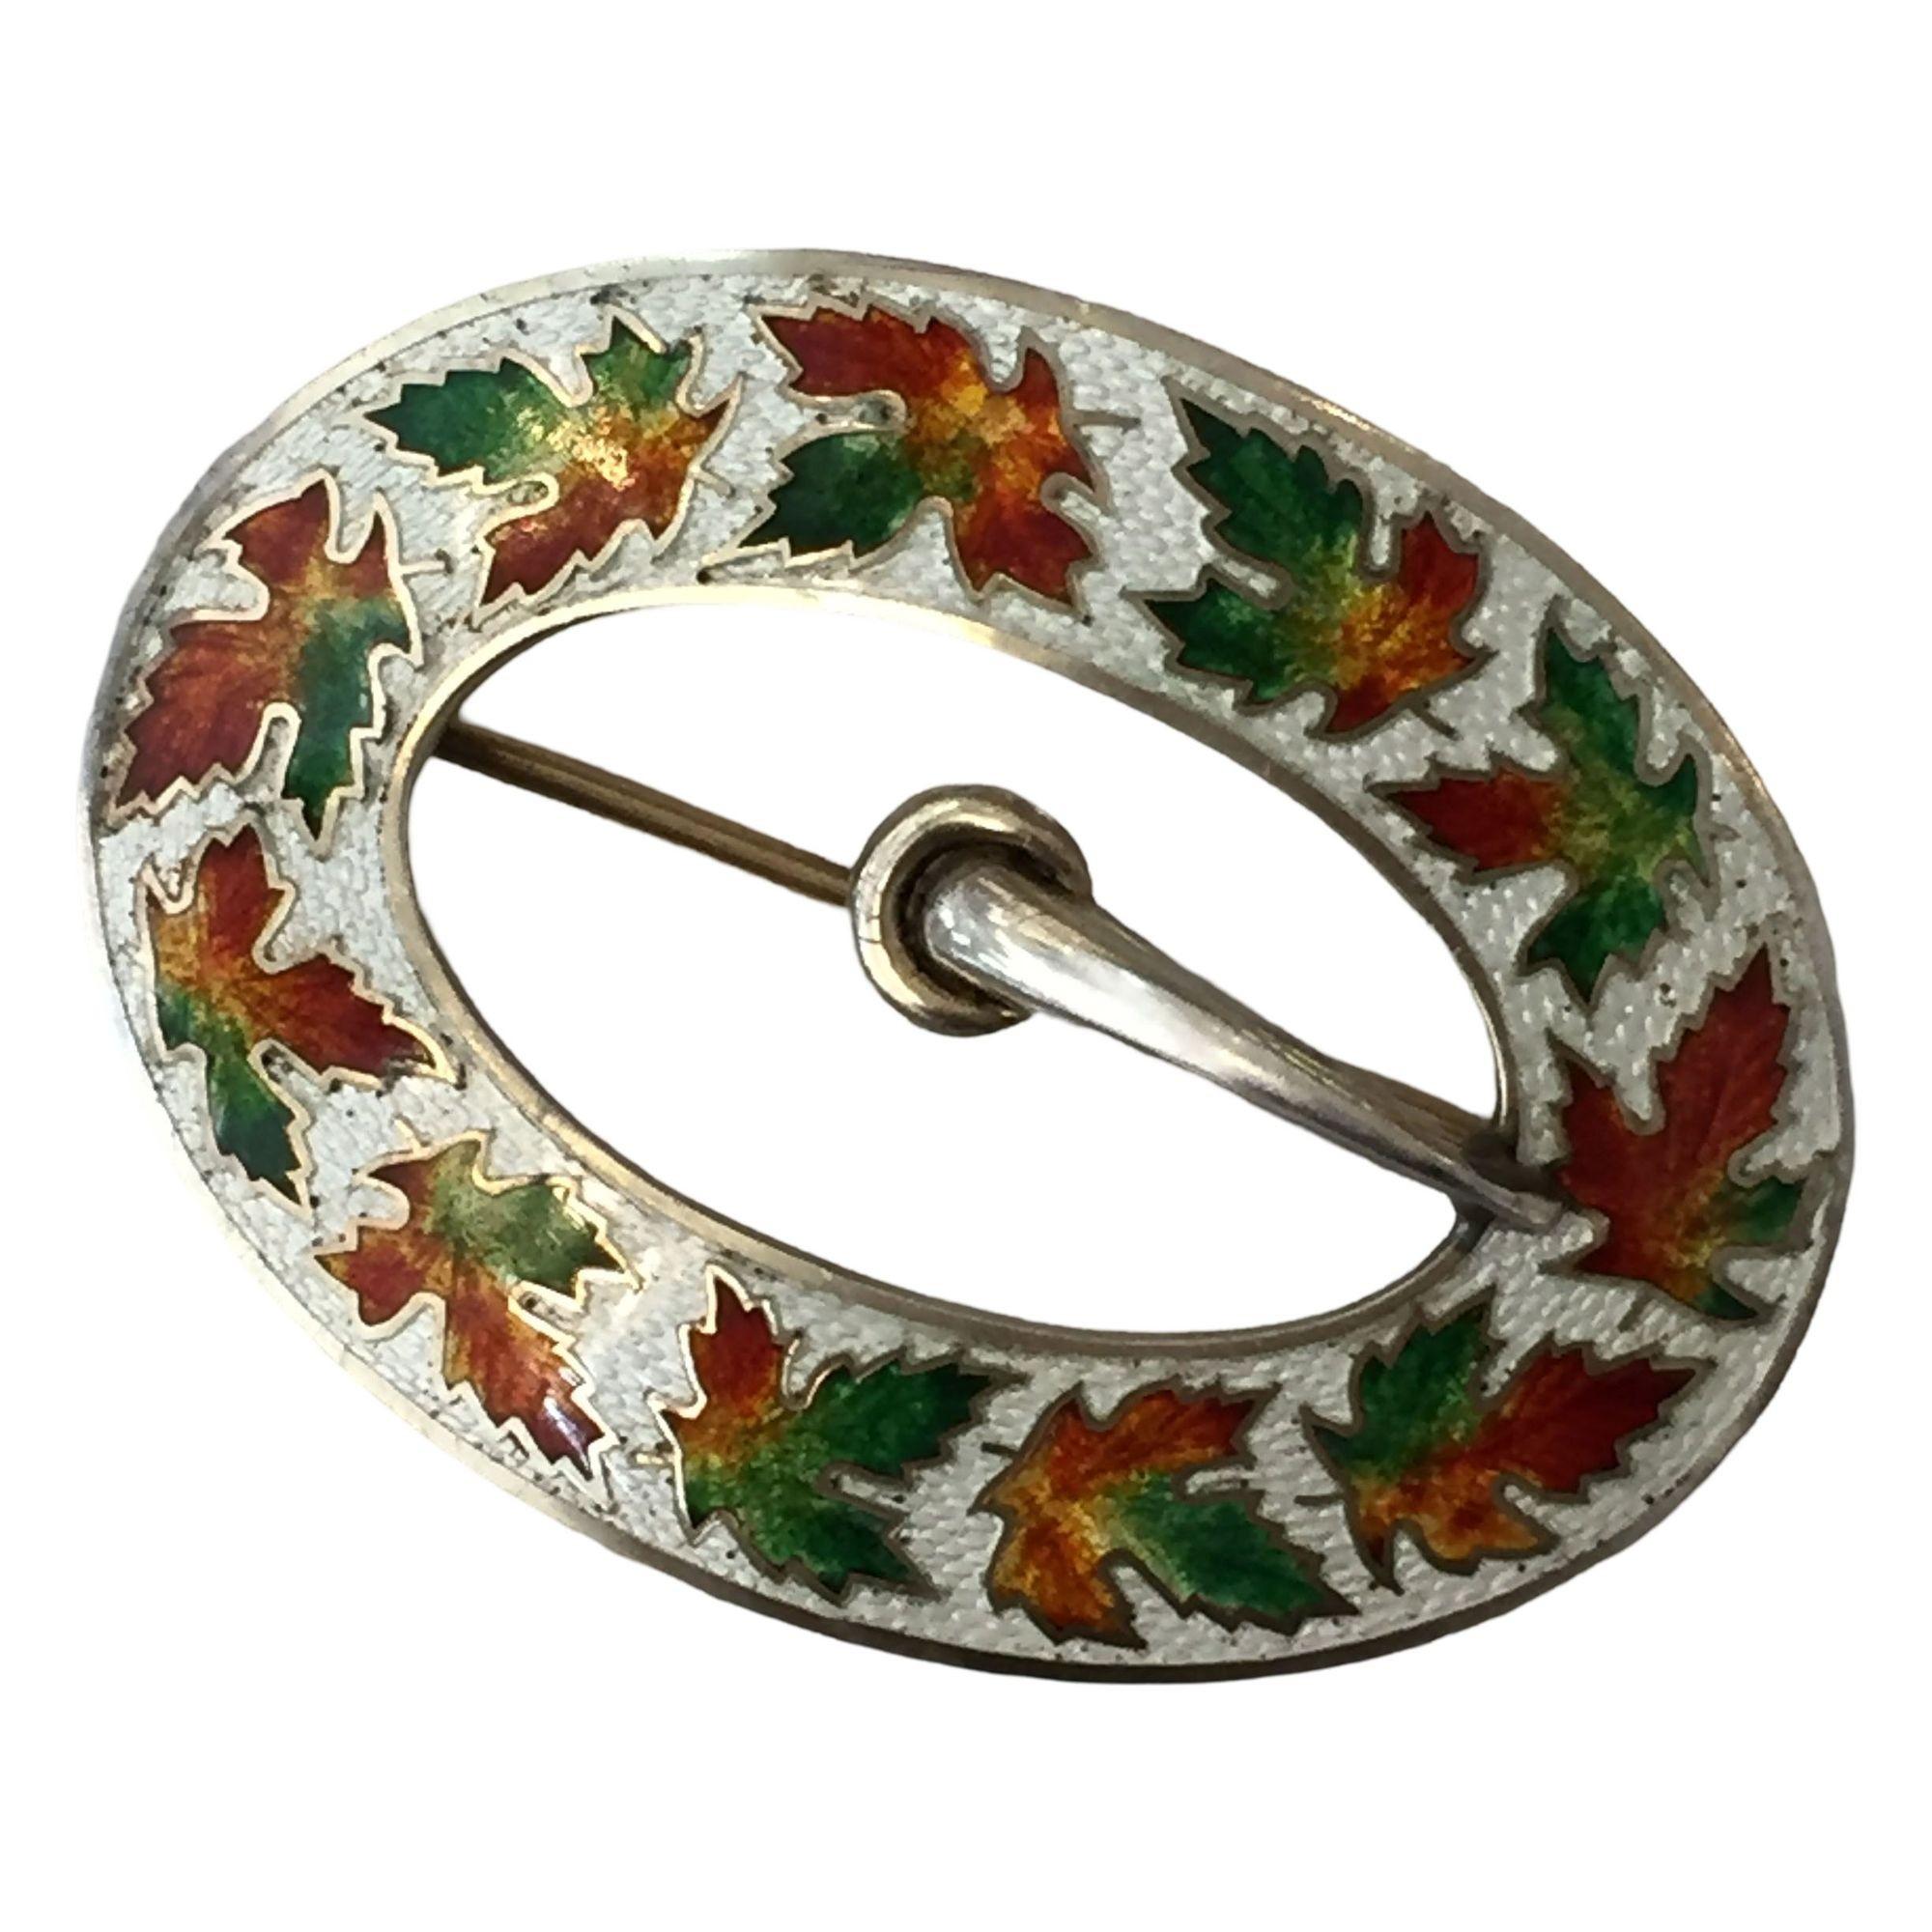 Sterling silver enamelware belt buckle brooch with pin back.
Signed with a Hallmark which reads 